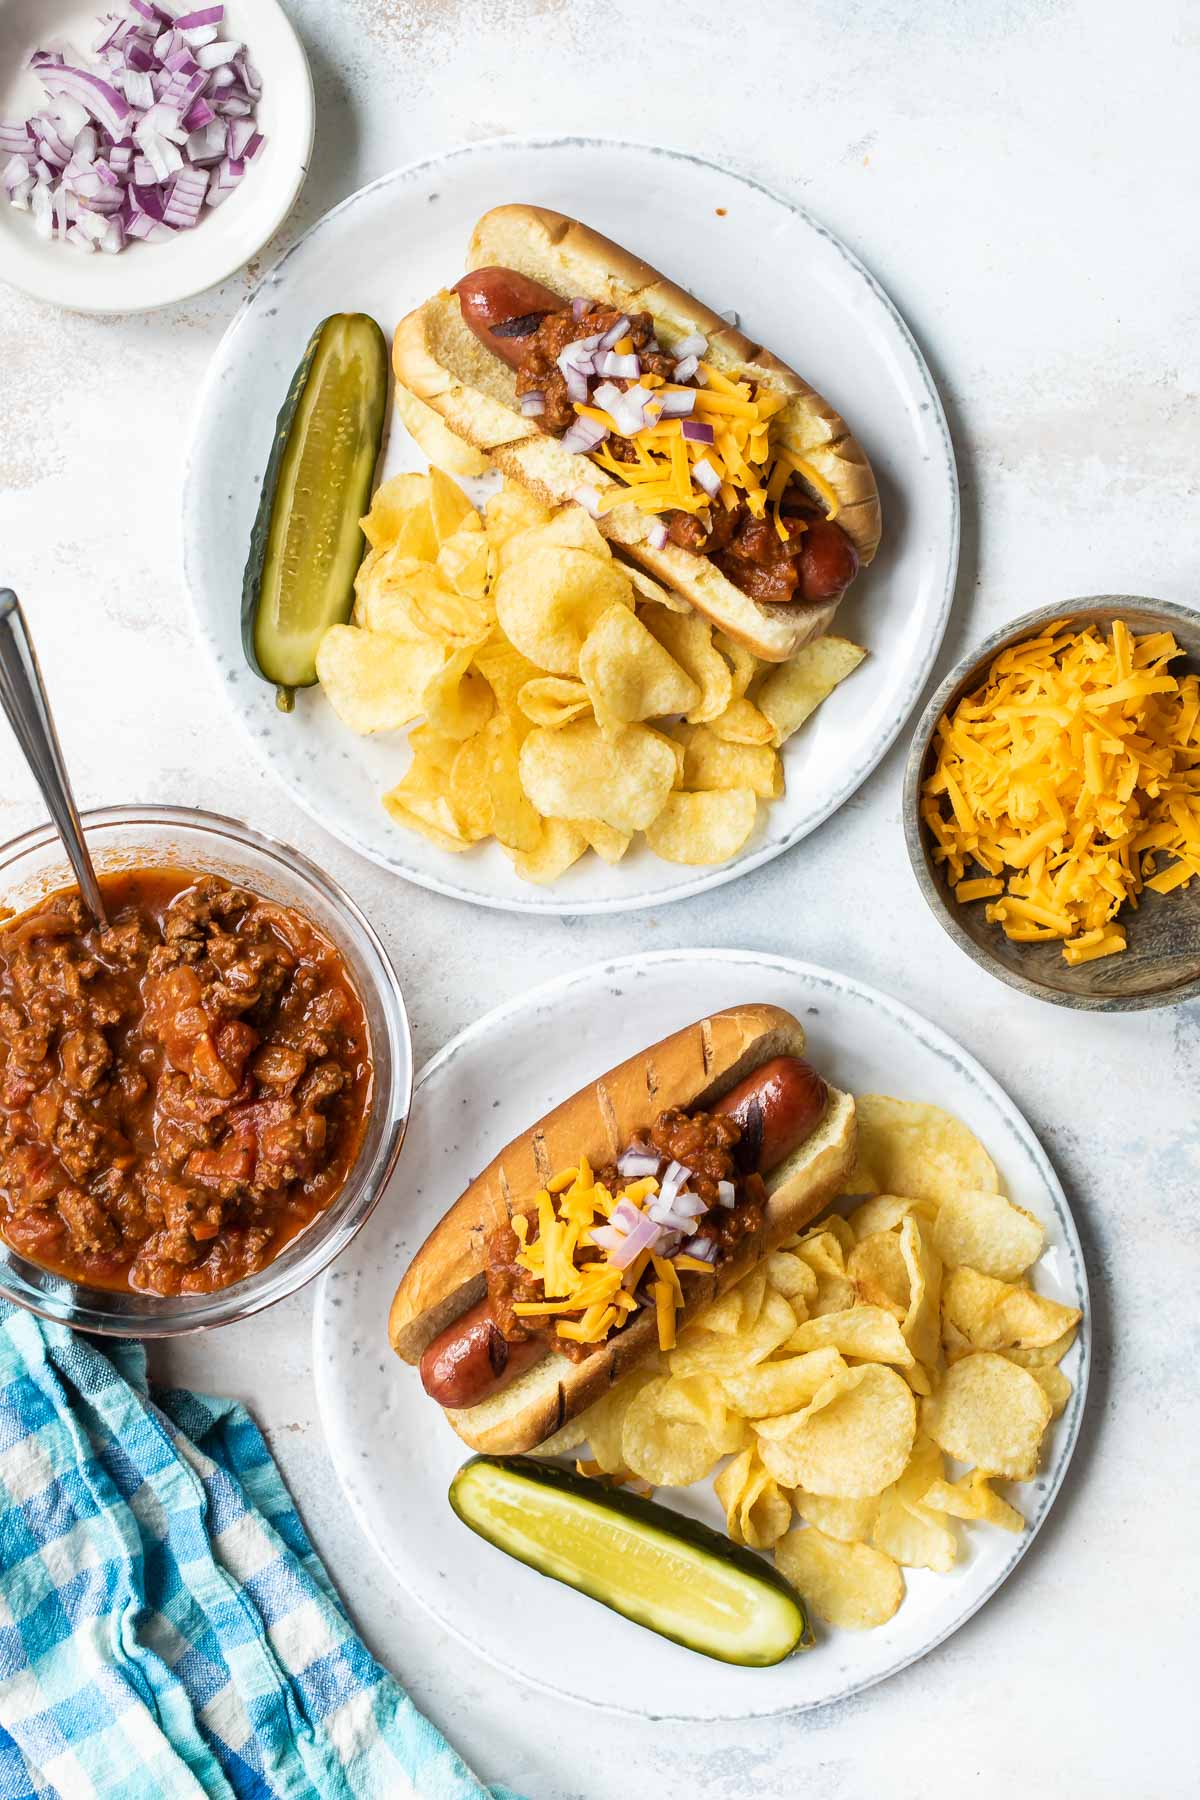 Two white plates with chili dogs and potato chips next to a bowl of Hot Dog Chili.